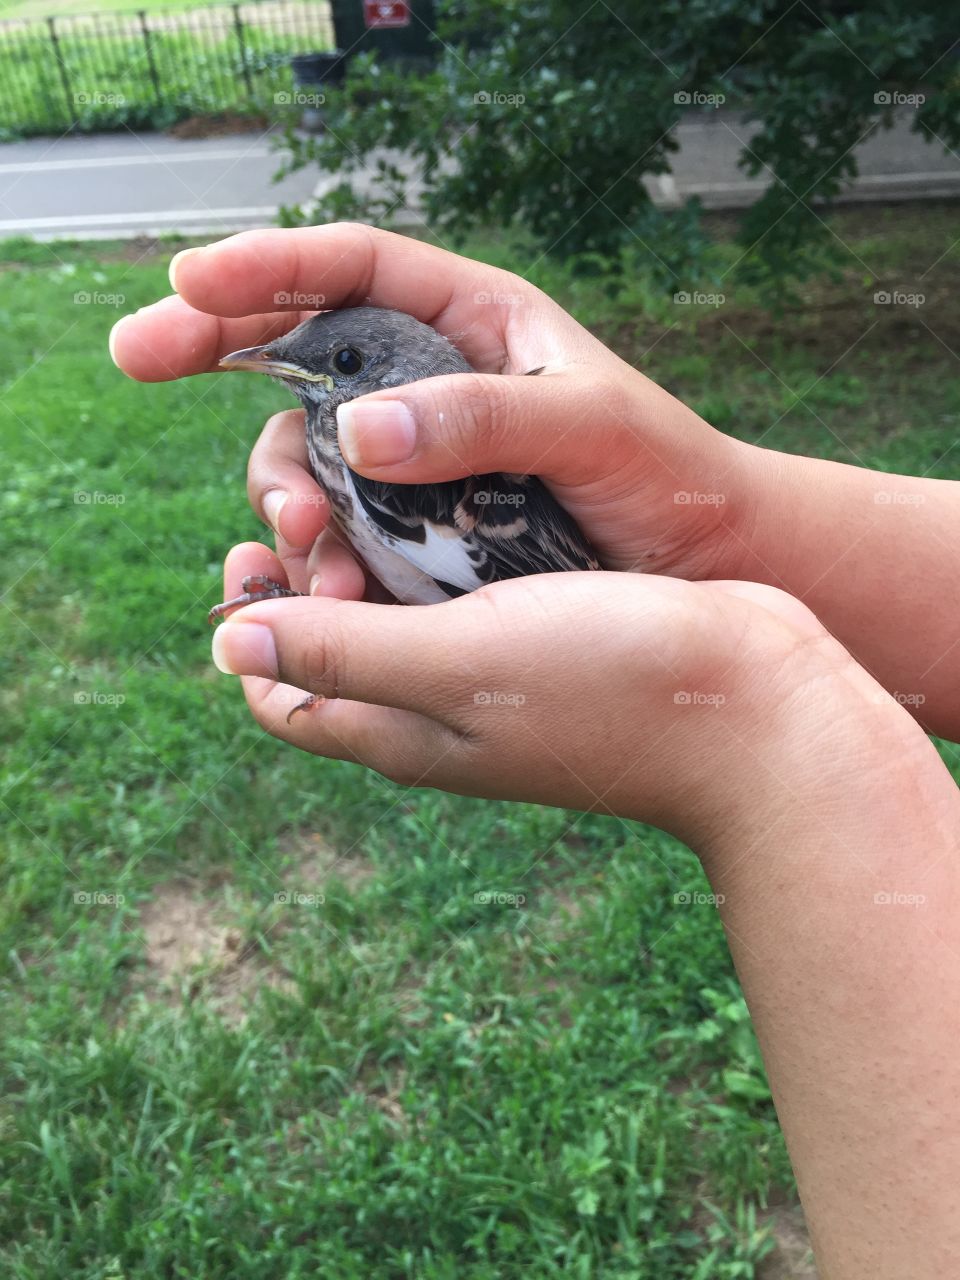 Baby Mockingbird . Went to the park and found a baby mockingbird. Released him later as his mother was looking for him.